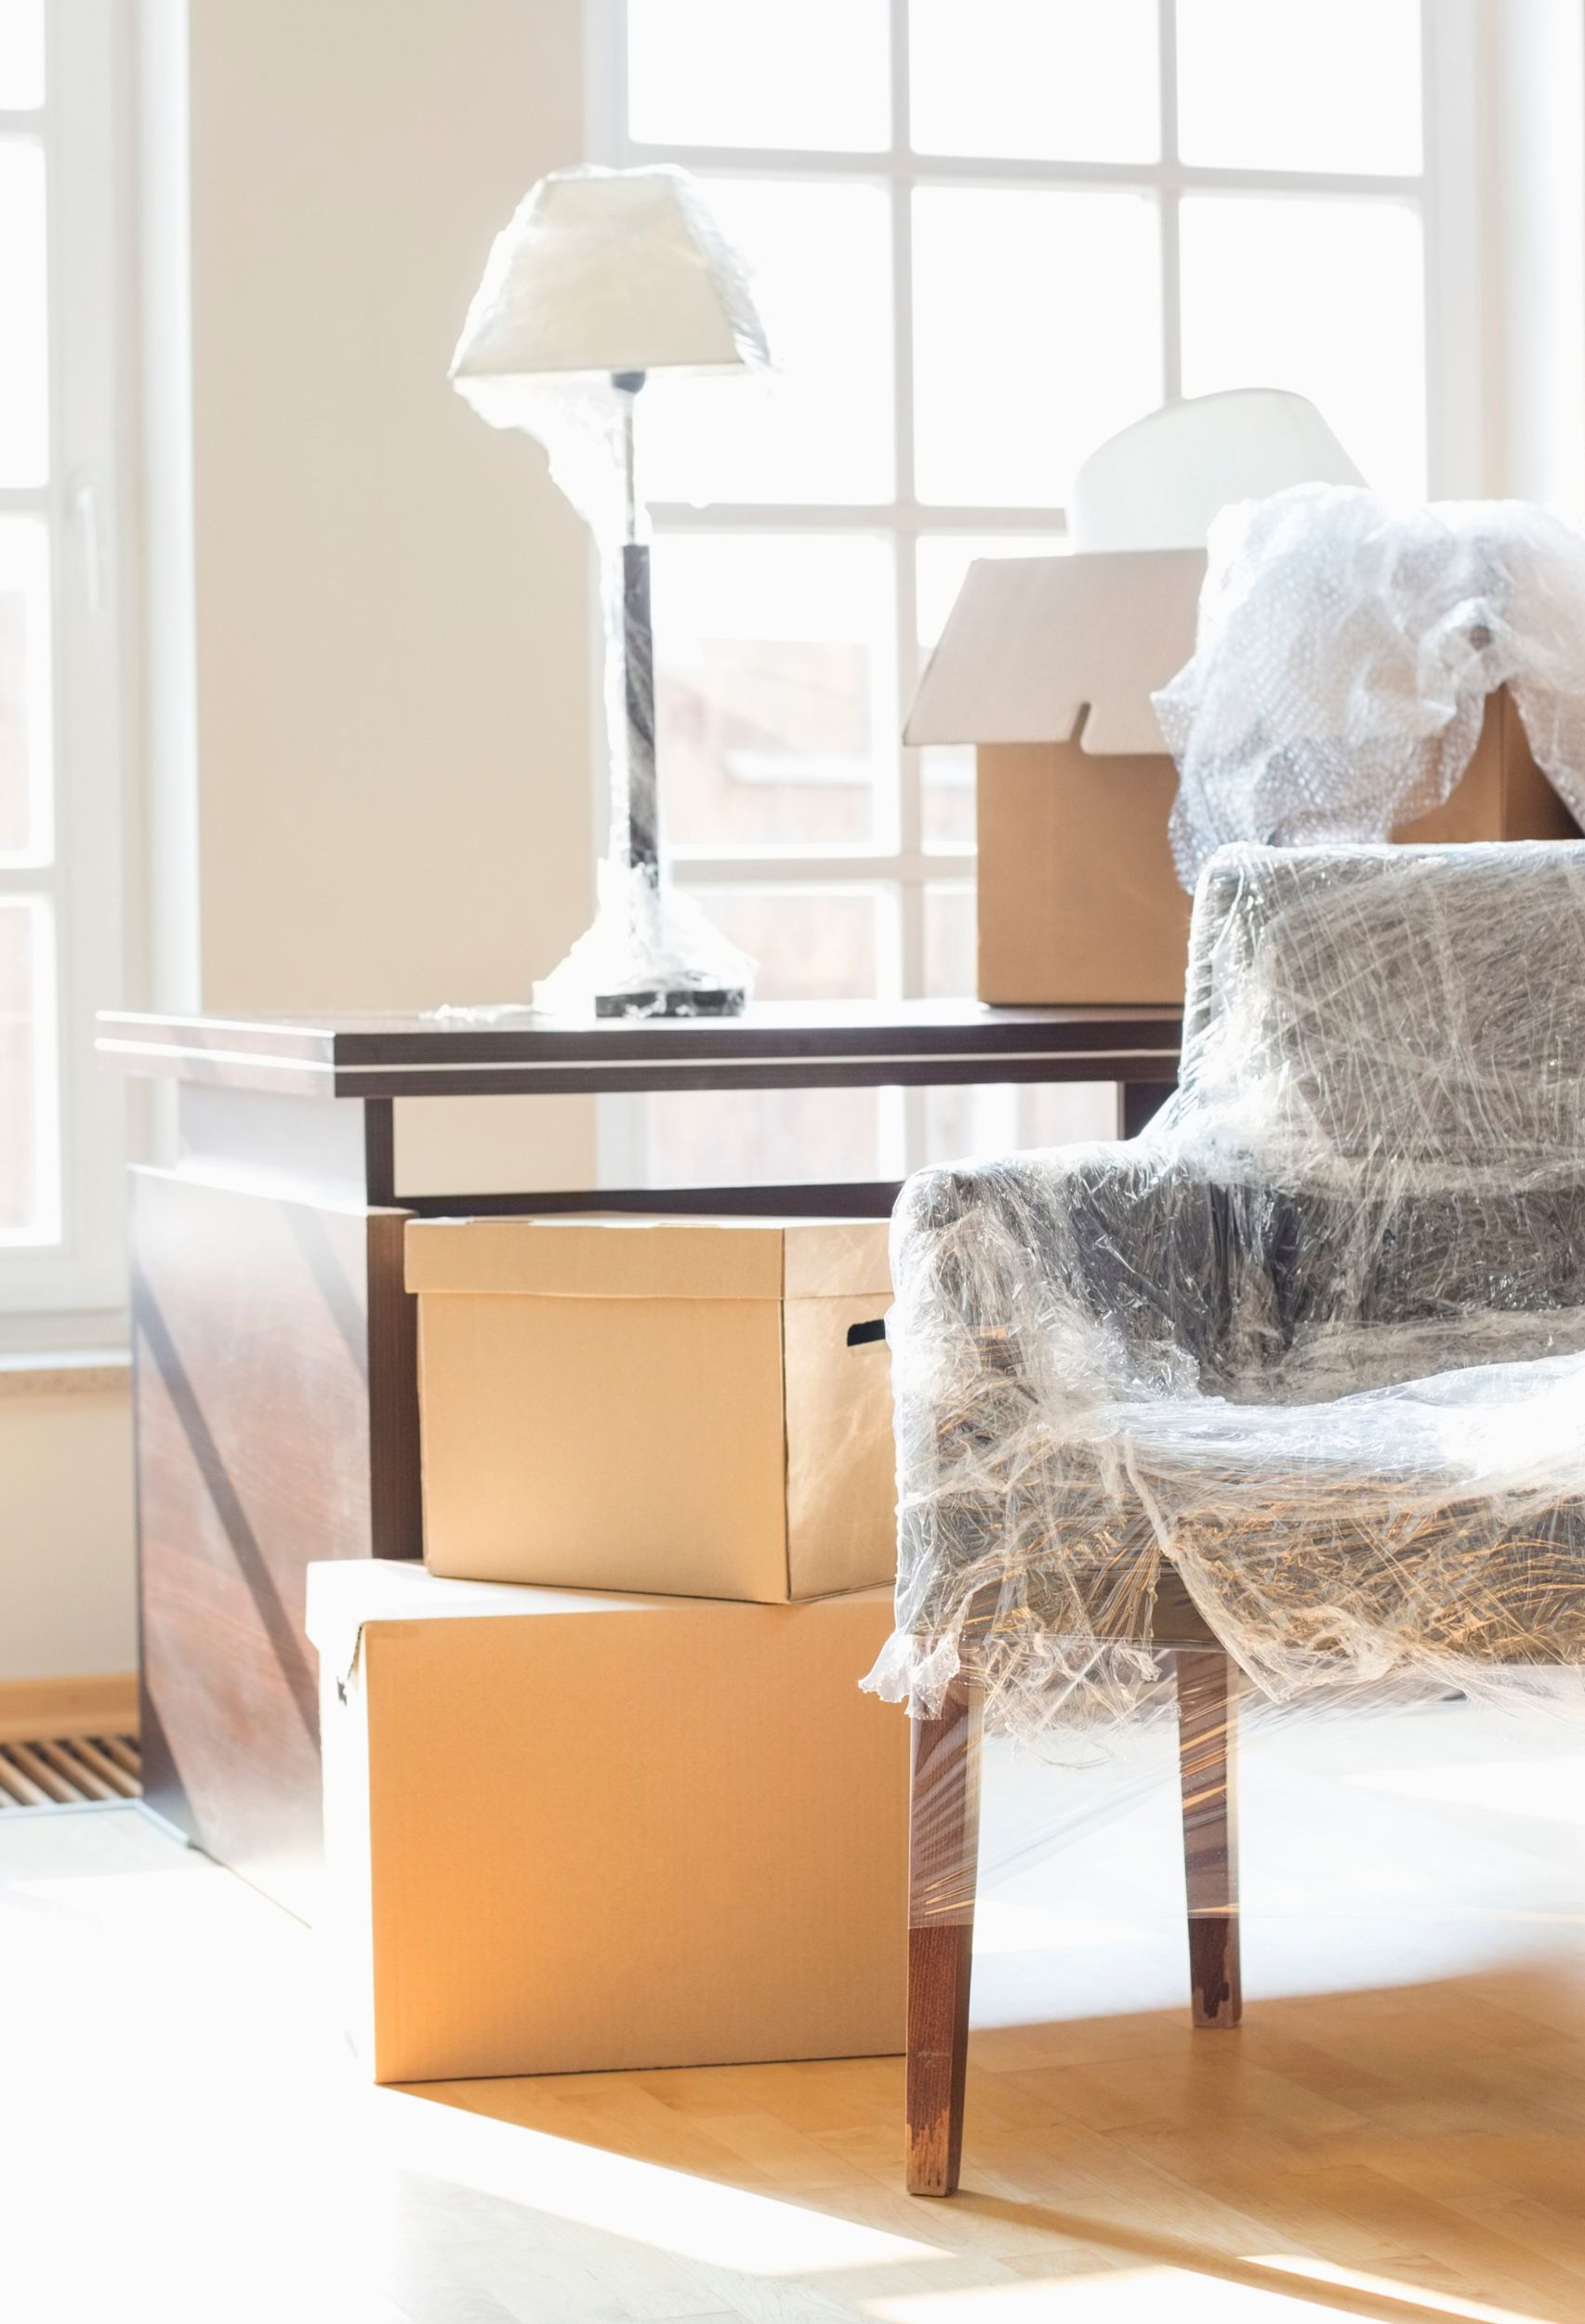 4 Essential Considerations When Moving to A New Home for The First Time